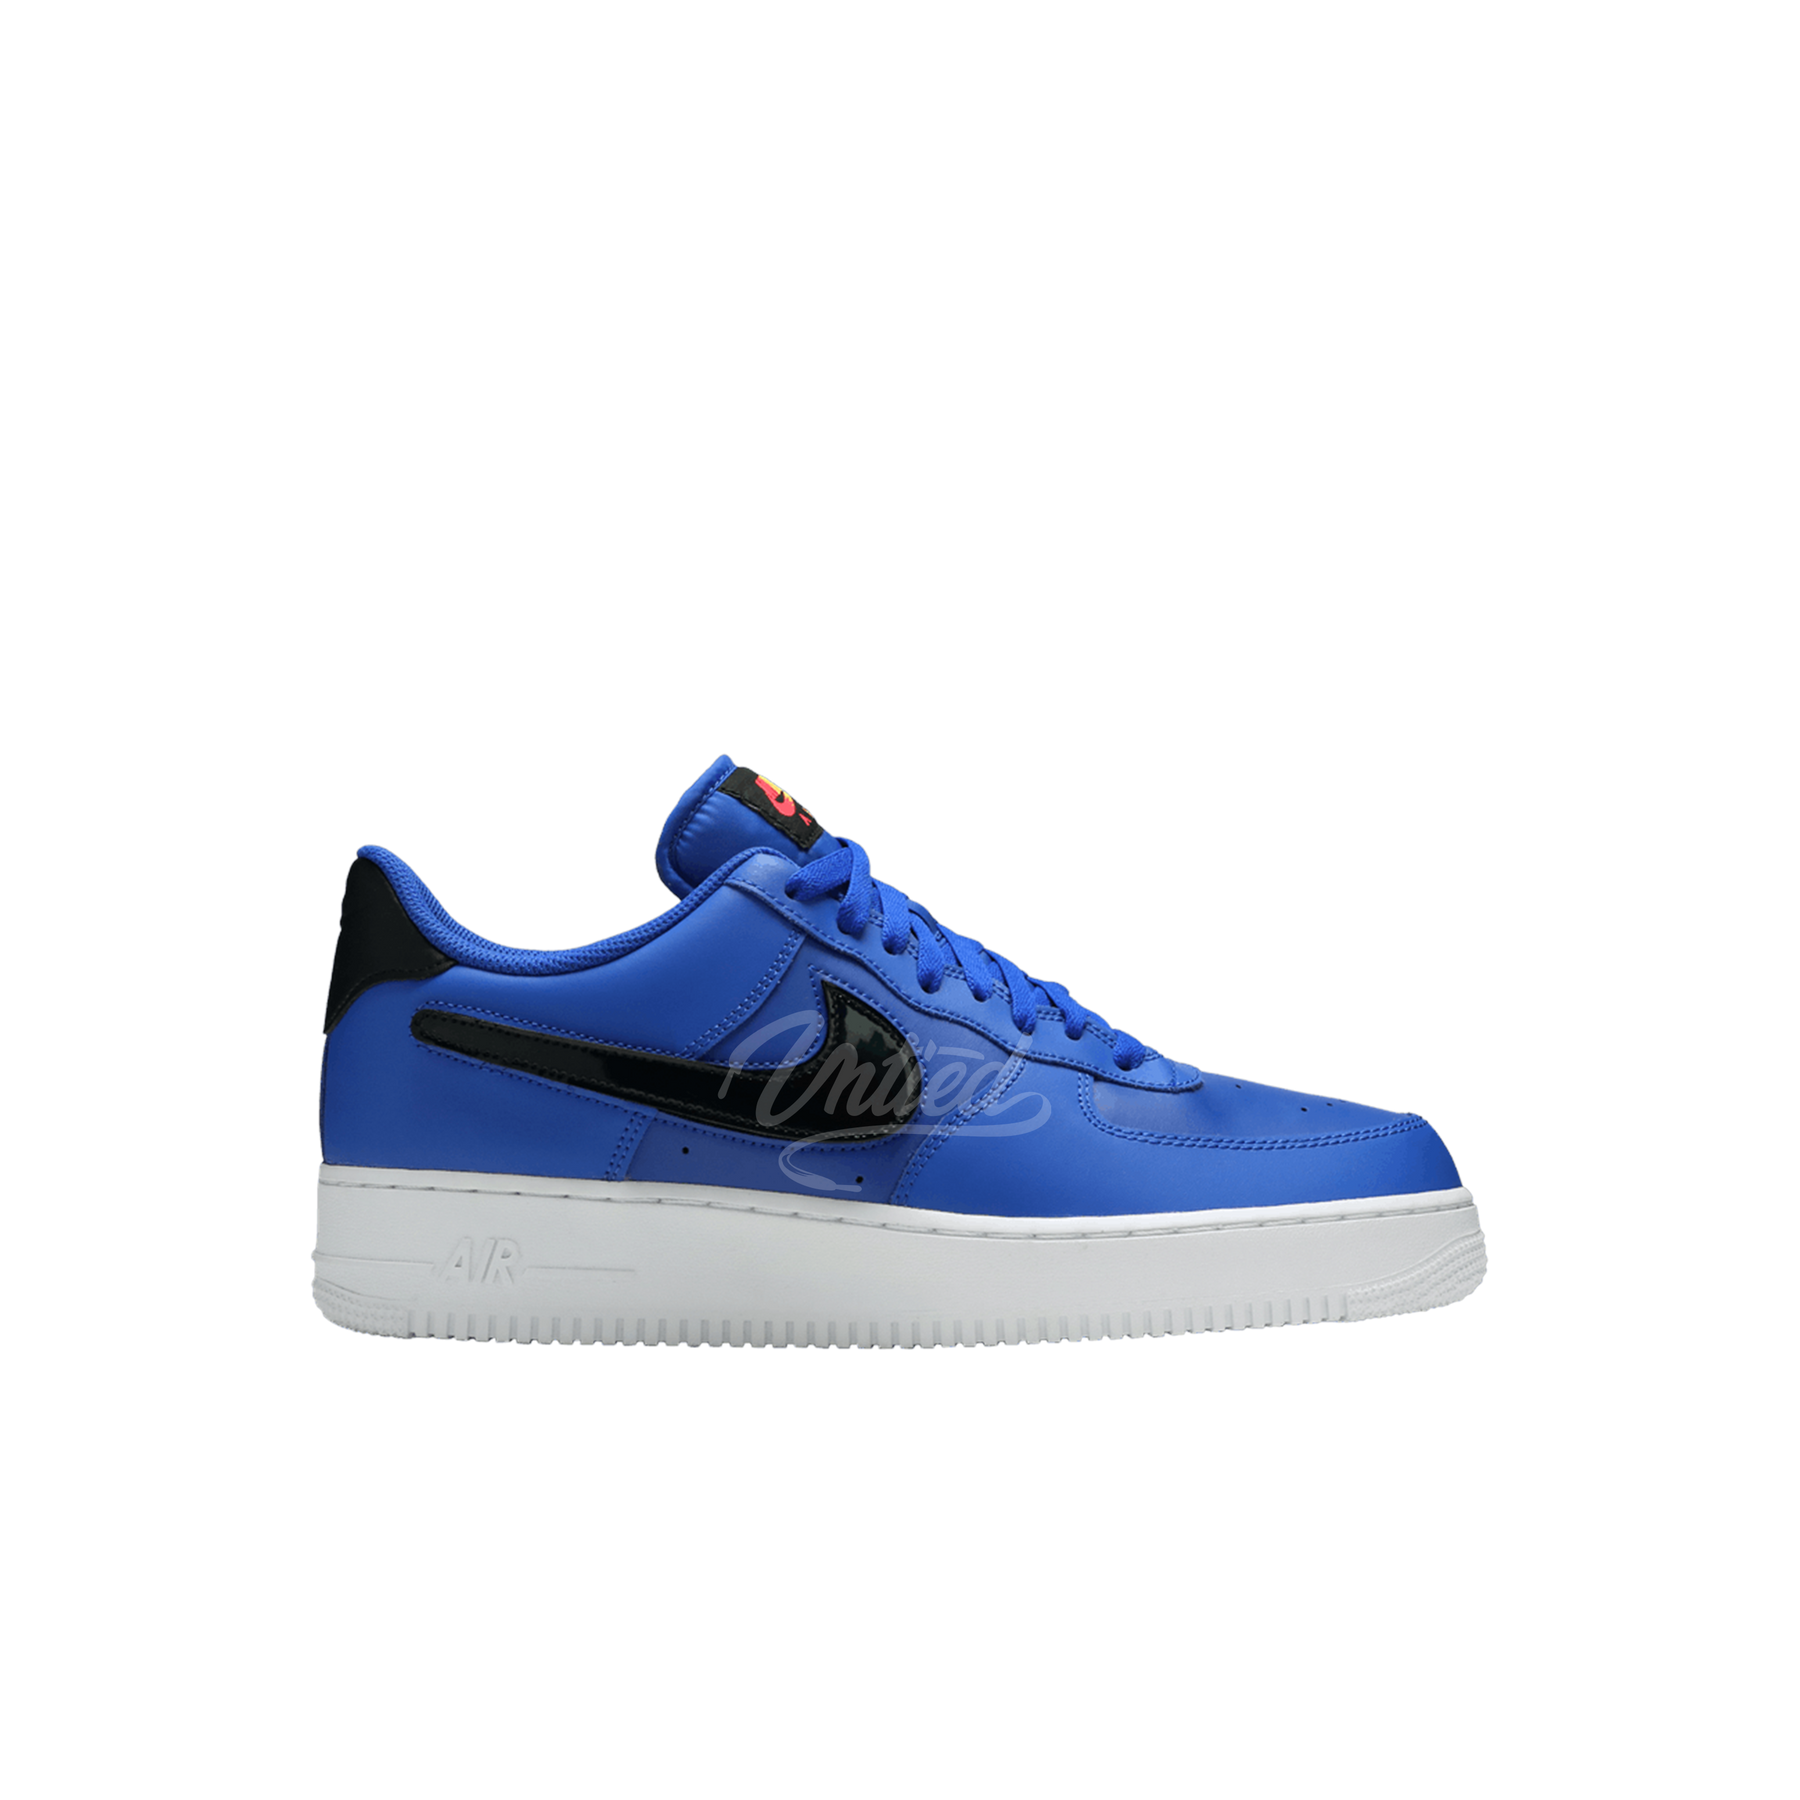 Air Force 1 "Removable Swoosh Pack Blue"